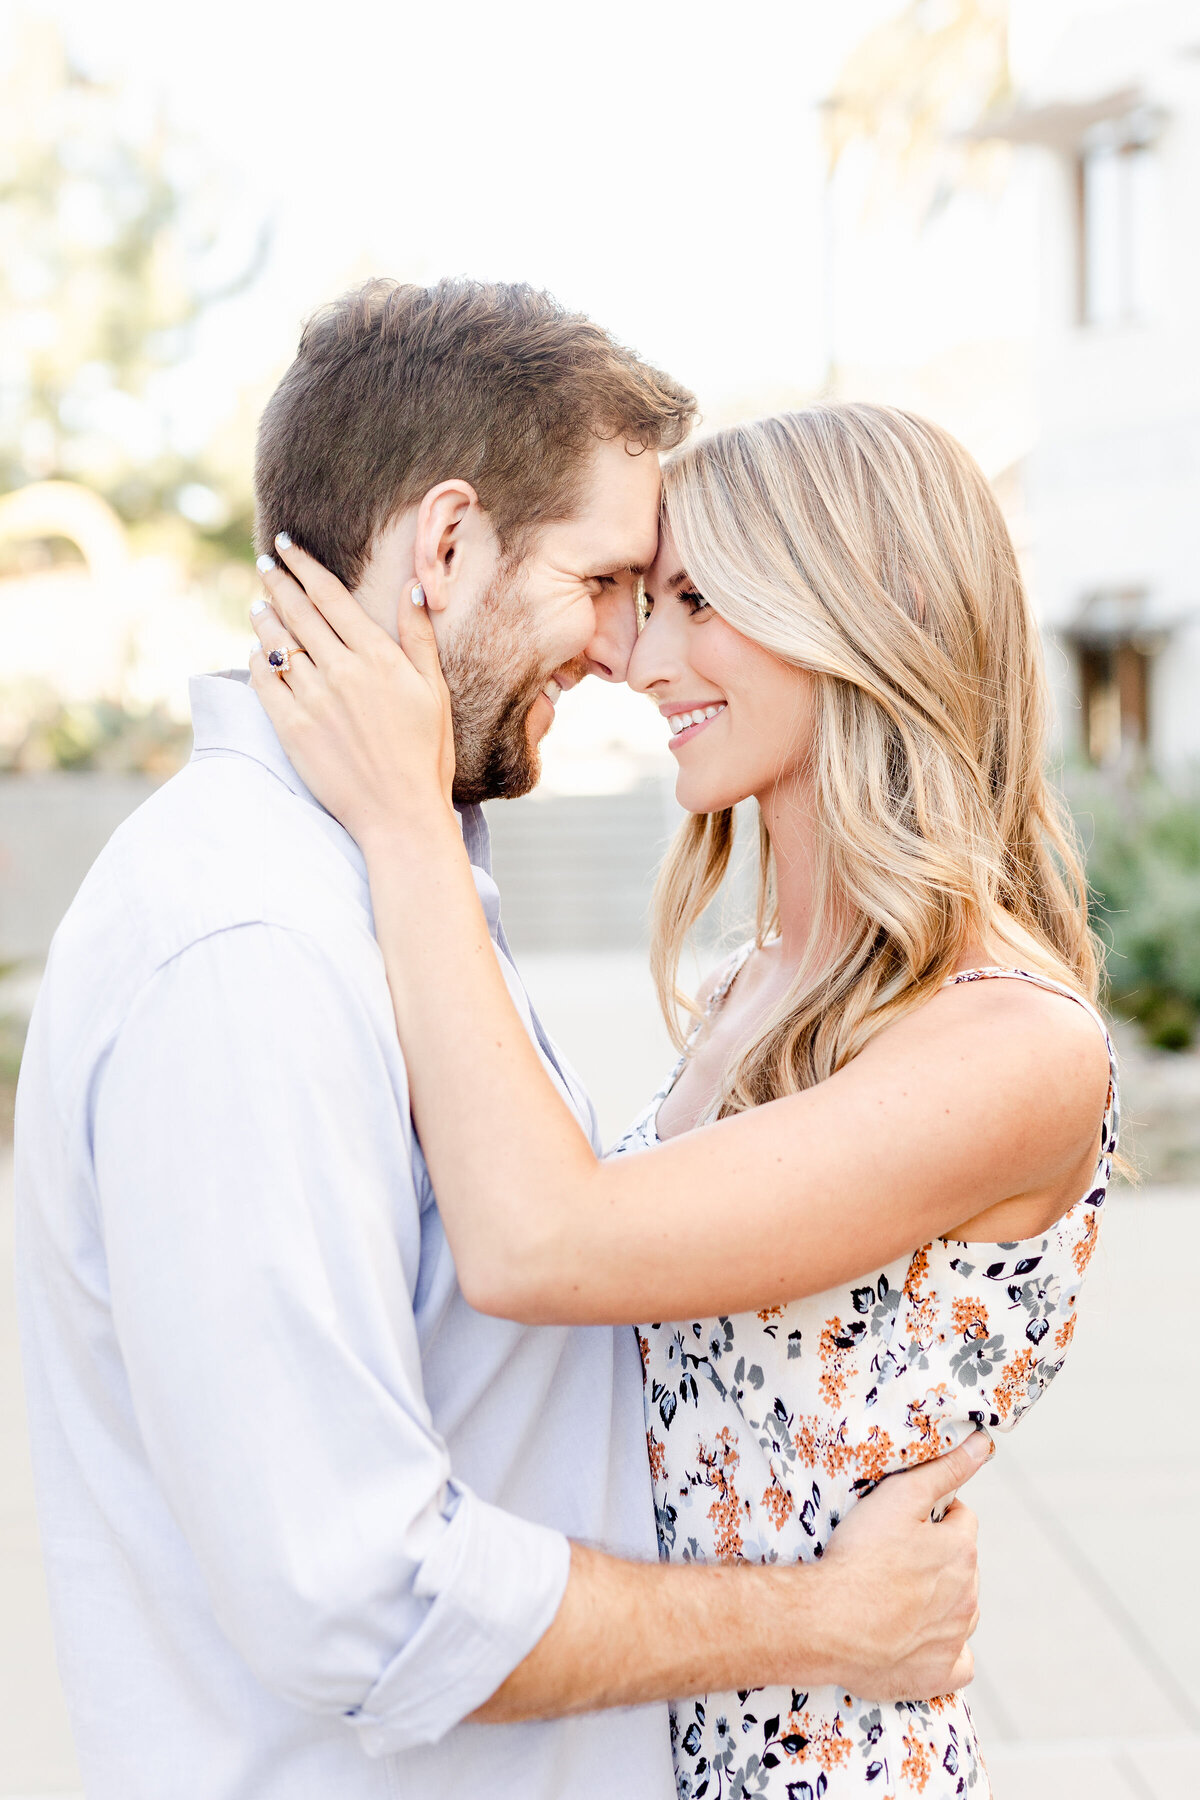 Scripps La Jolla engagement session by the university.